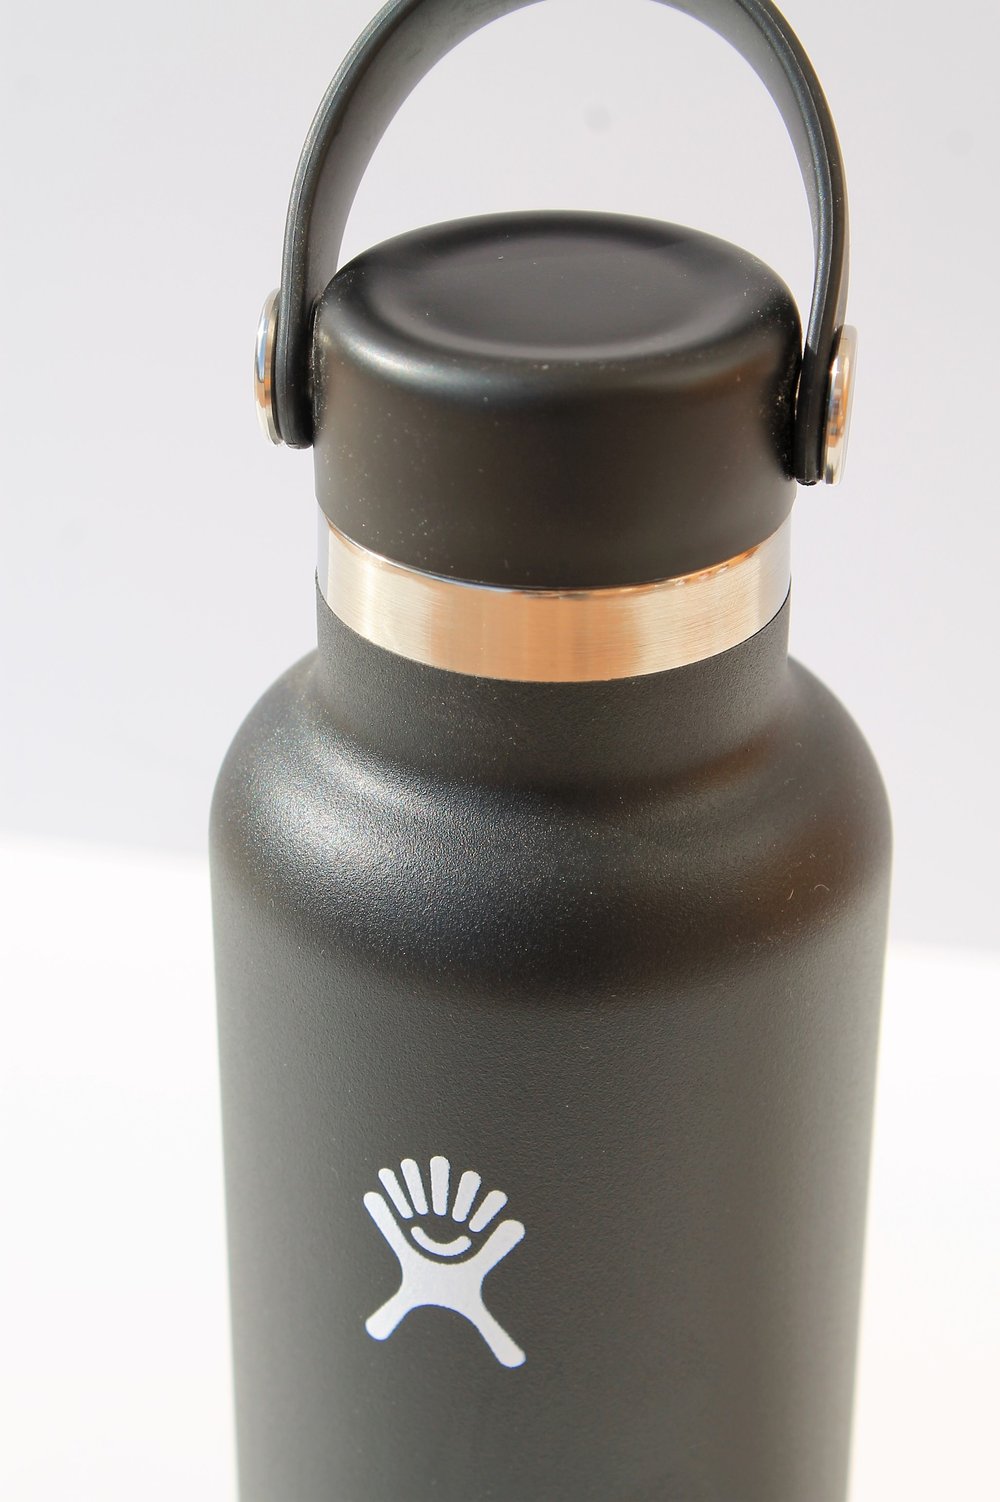 Hydro Flask S21SX001 Stanrd Mouth Insulated Water Bottle